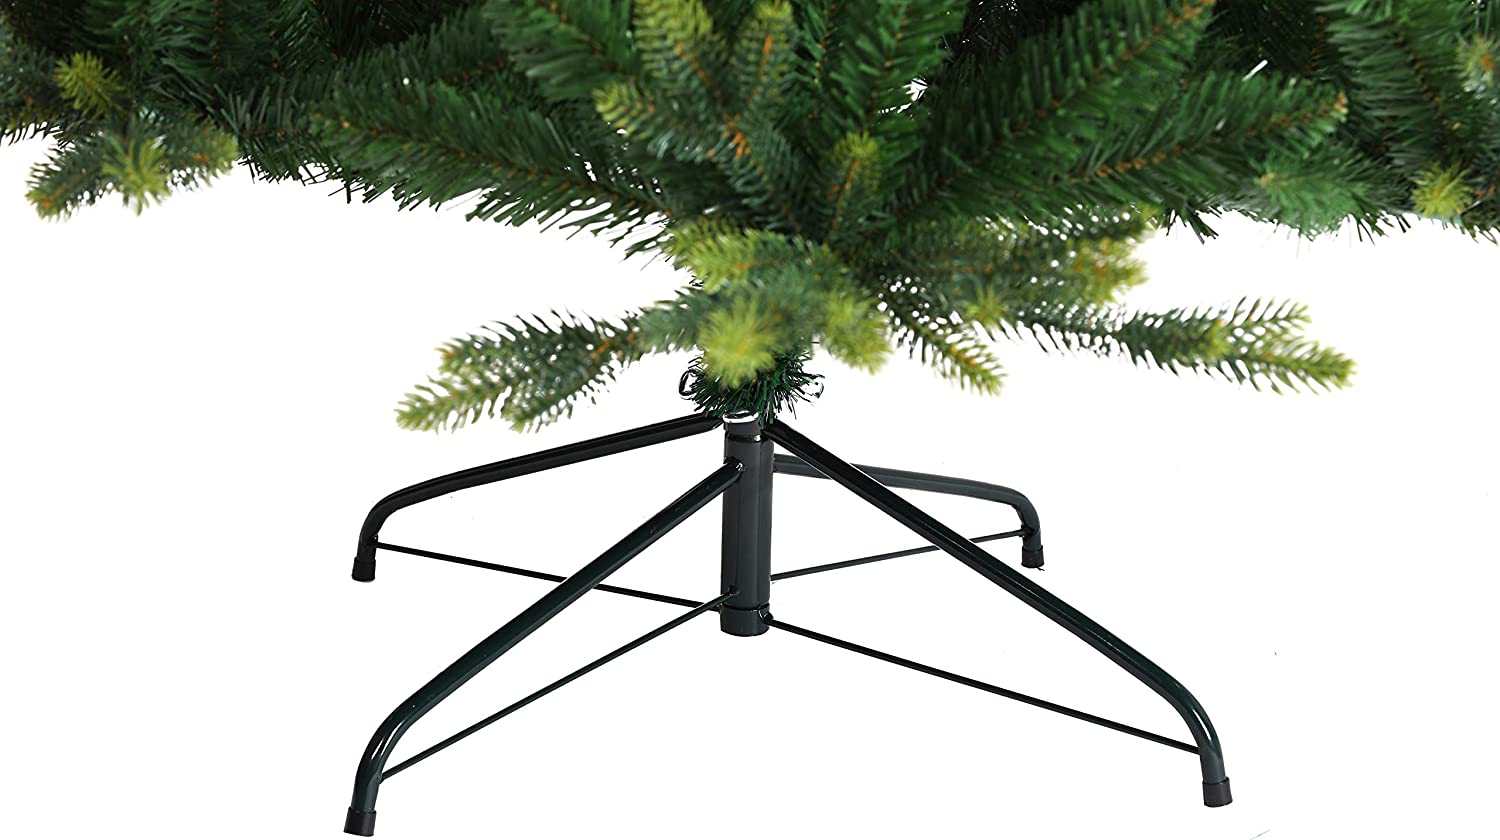 Evre Spruce 4Ft Christmas Tree metal stand close up